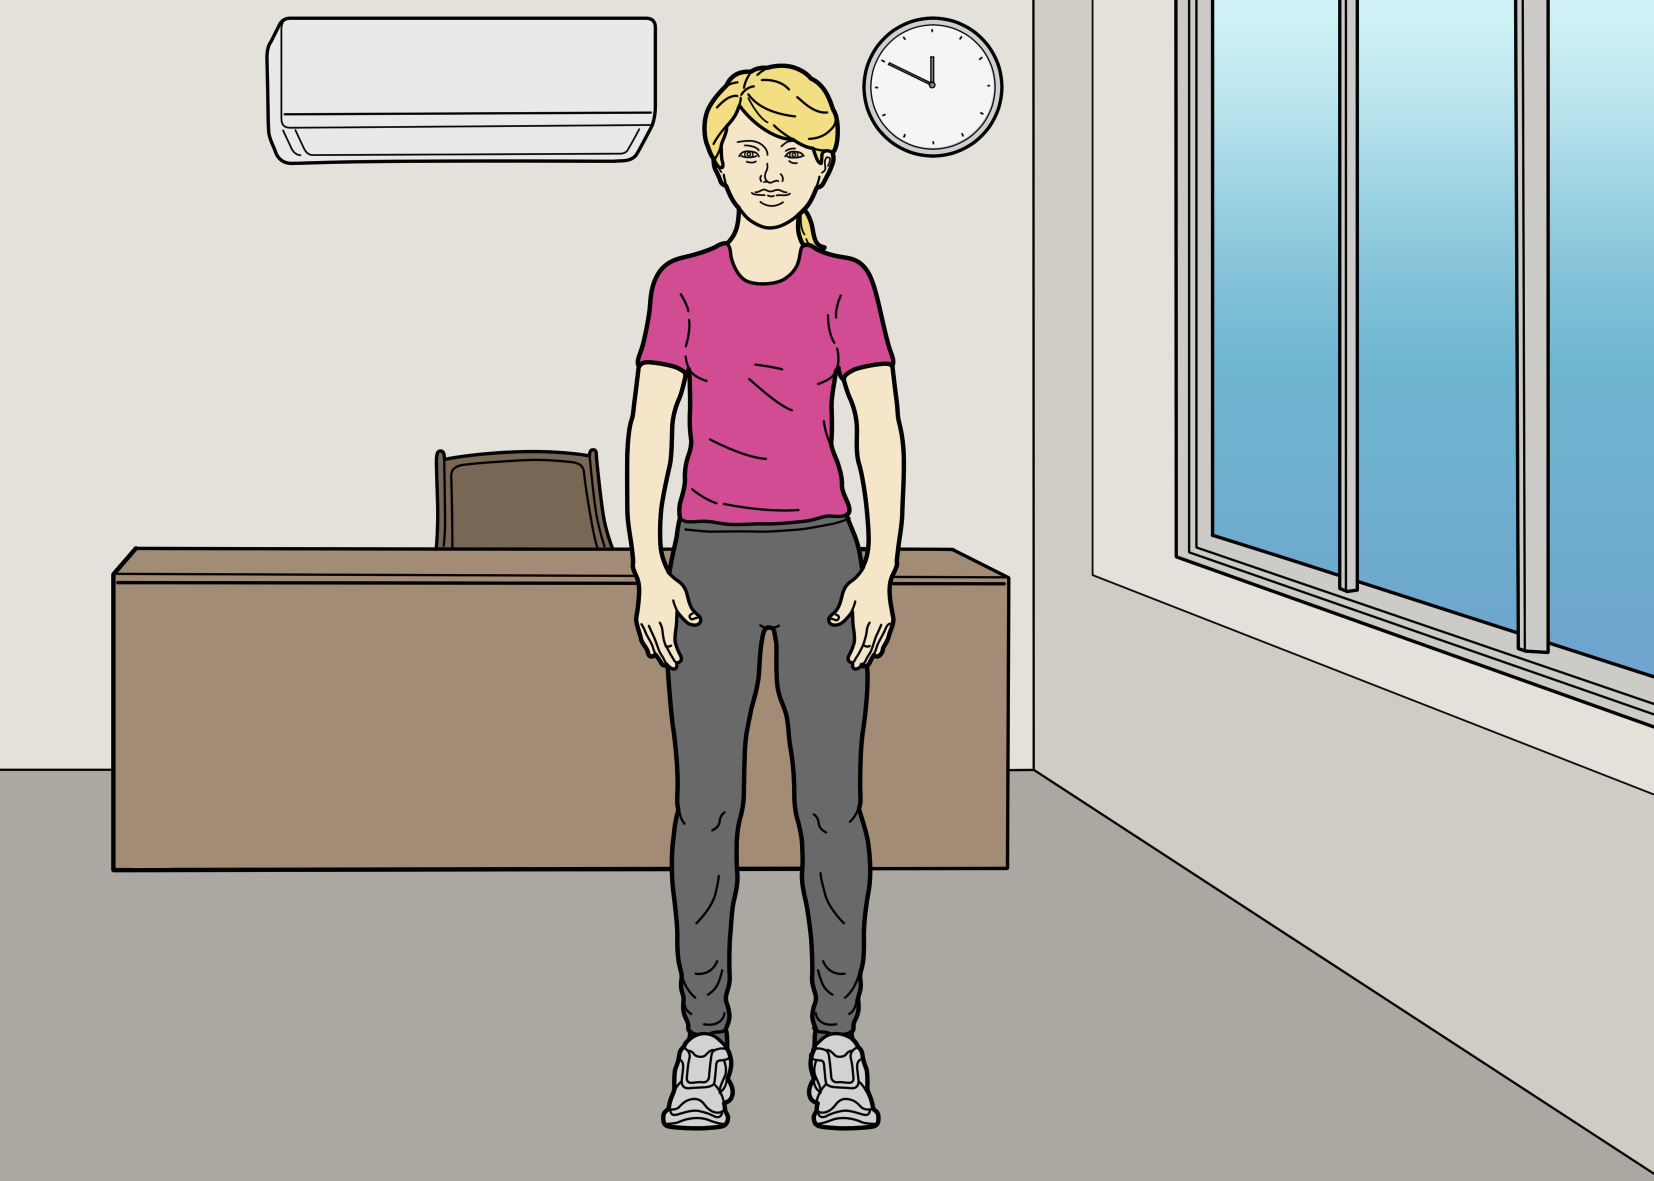 A person standing still next to an air-conditioner.